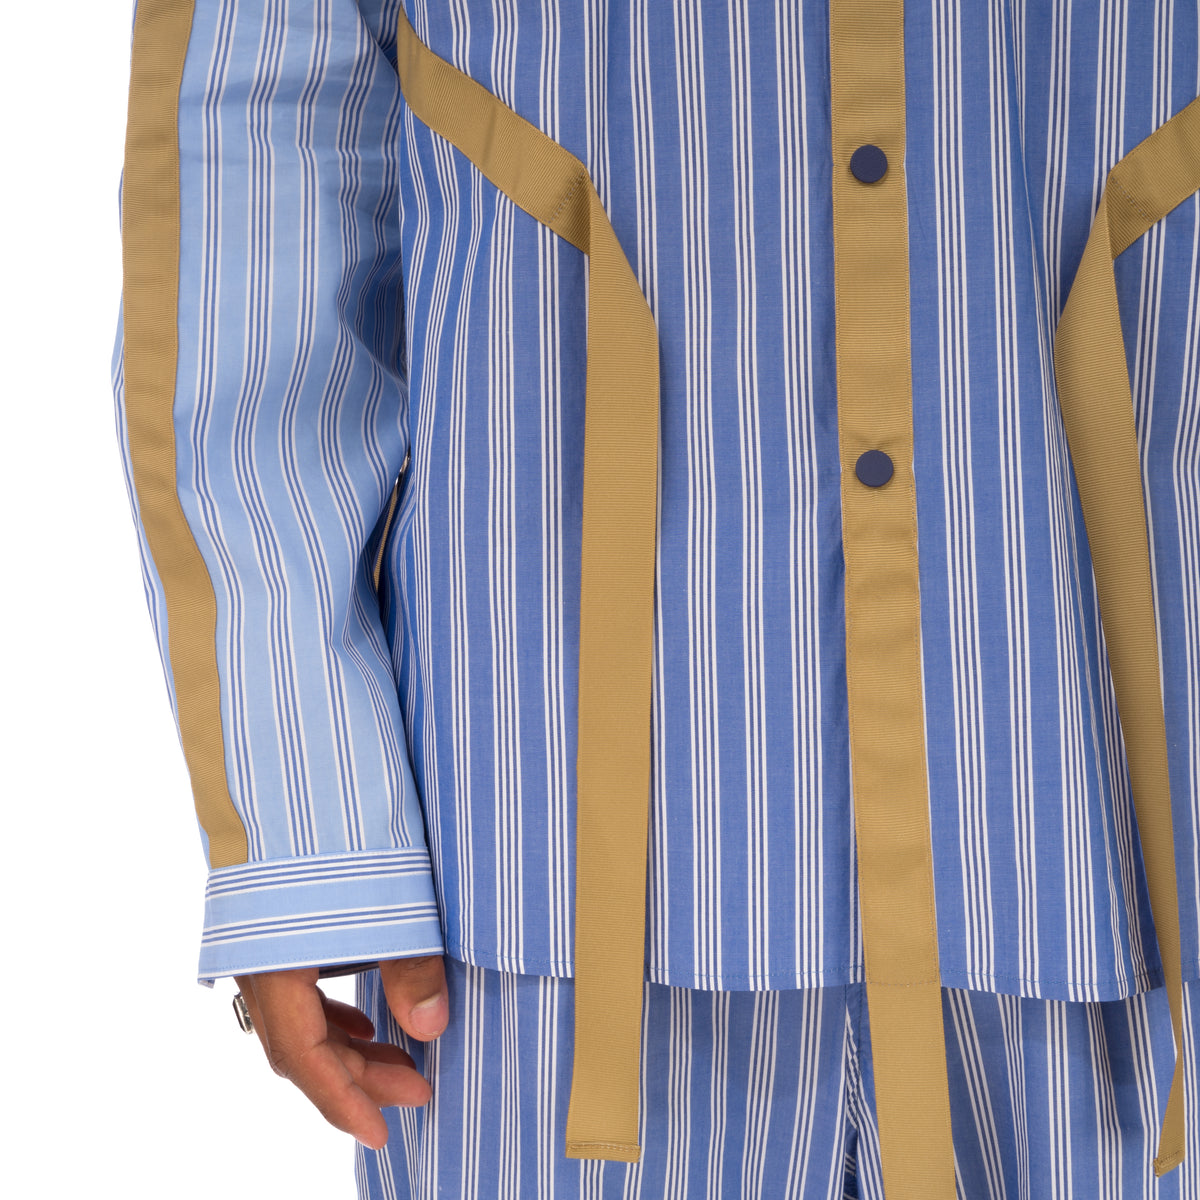 White Mountaineering | Striped Broad Taped Shirt Blue - Concrete